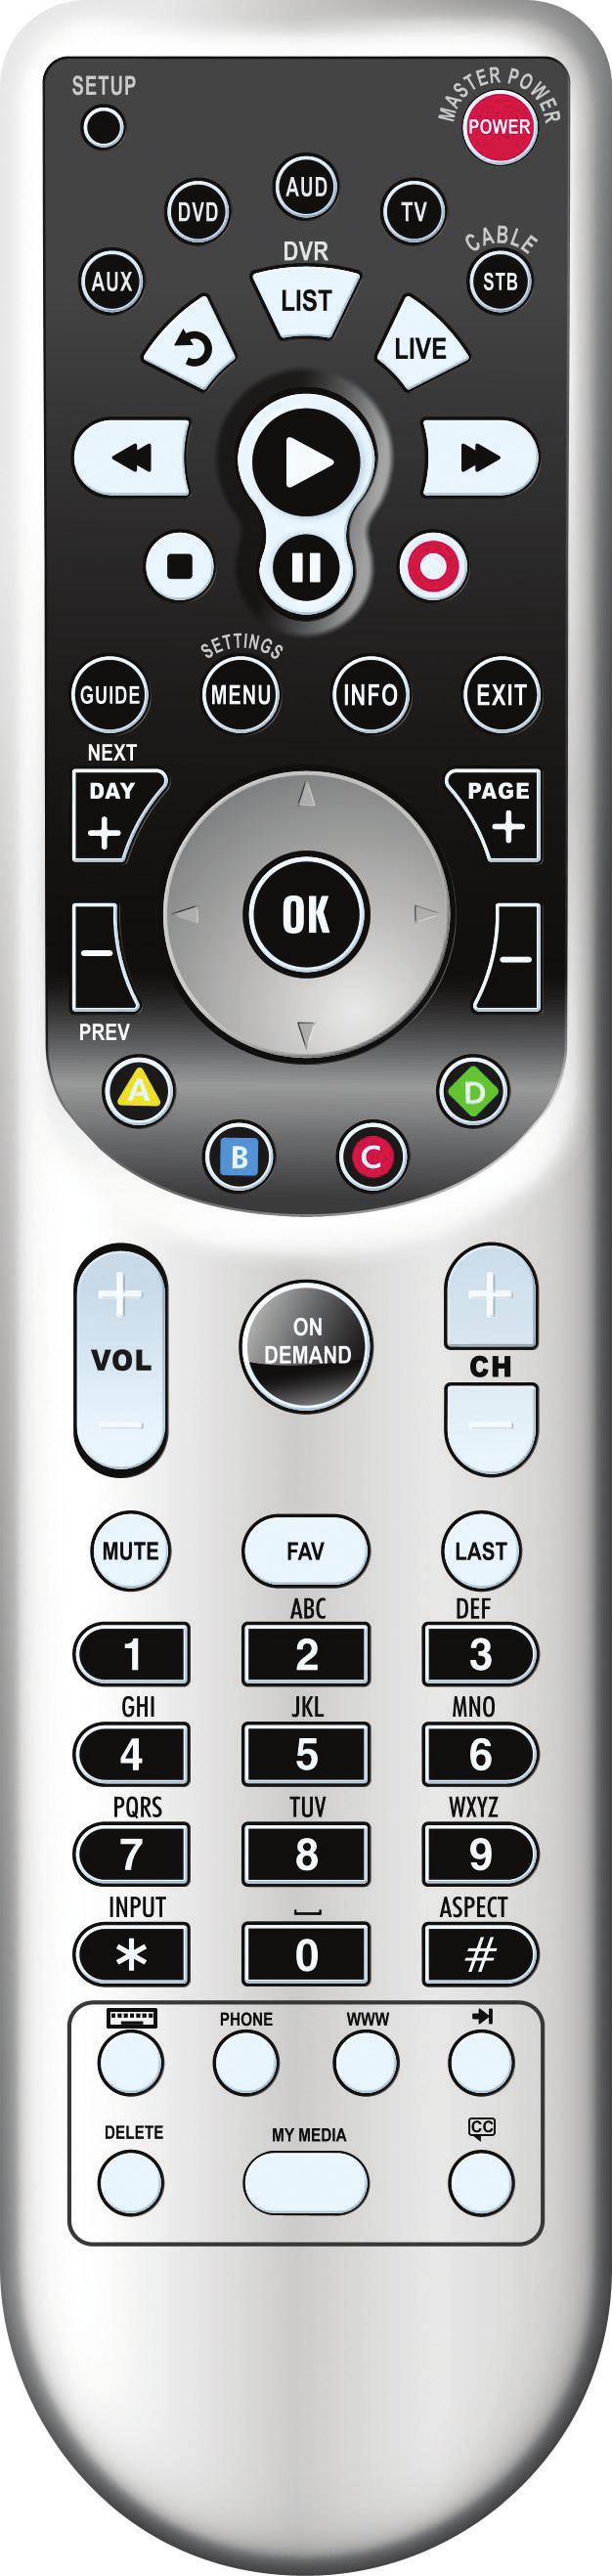 Device Selection Send commands to AUX, DVD, AUD, TV or STB DVR Controls Go back, bring up DVR list, go to live TV MENU Displays Menubar GUIDE Displays Guide DAY - / + View Guide a day forward or back